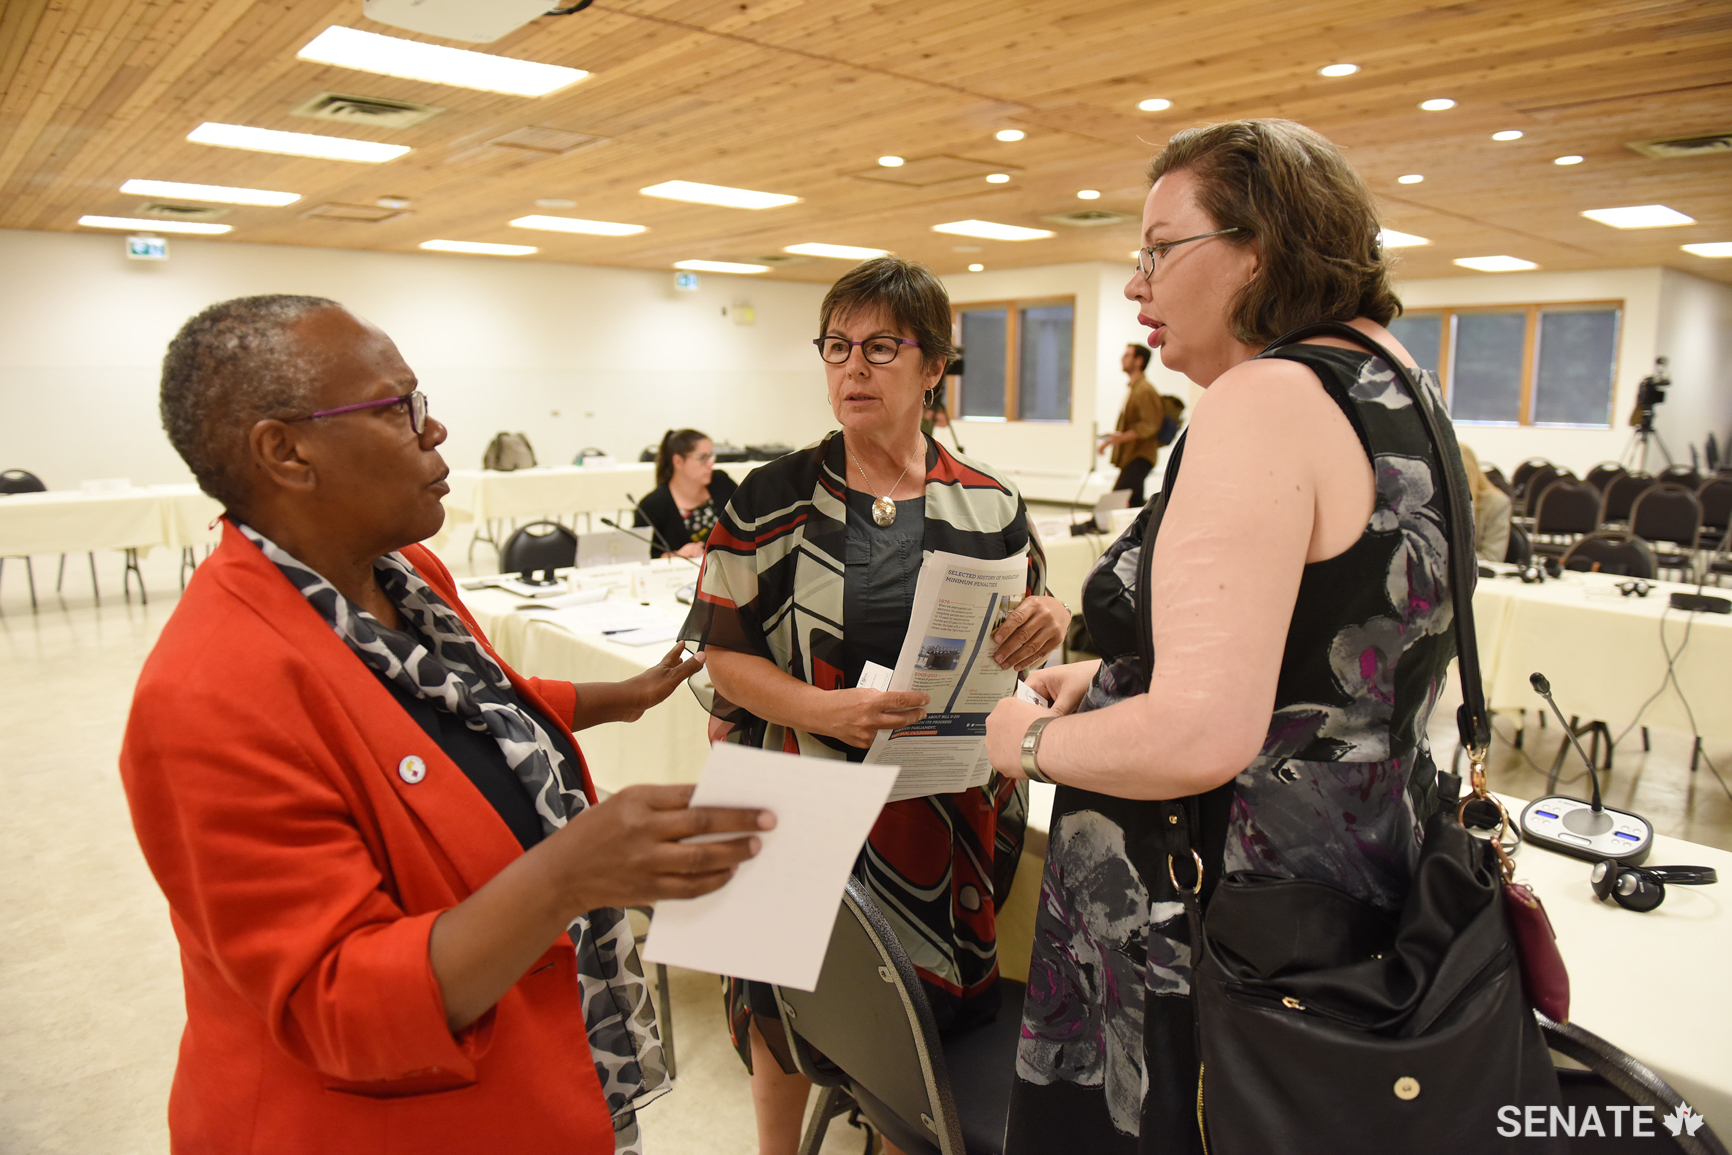 From left, committee chair Senator Wanda Thomas Bernard and Senator Kim Pate speak with Lisa Neve, once considered the most dangerous woman in Canada. She was imprisoned indefinitely in 1994 after becoming the second of just five Canadian women to receive a <a href='https://www.publicsafety.gc.ca/cnt/cntrng-crm/crrctns/protctn-gnst-hgh-rsk-ffndrs/dngrs-ffndr-dsgntn-en.aspx'>dangerous offender designation</a>. Her designation was overturned in 1999 and she was released. Ms. Neve testified before the committee during a public hearing in Edmonton.